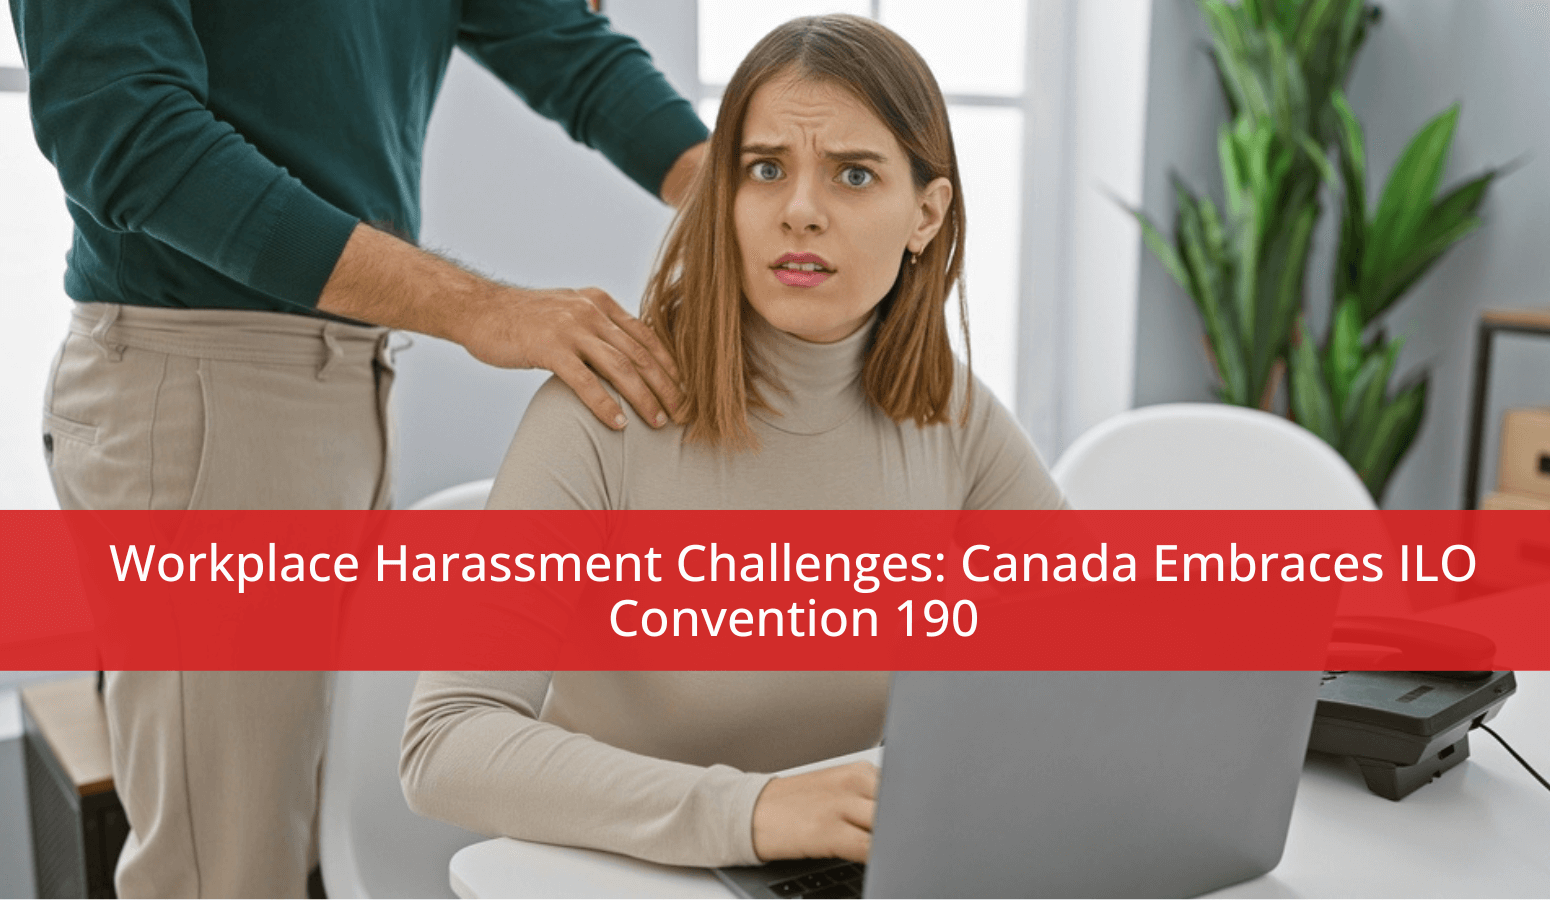 Featured image for “Workplace Harassment Challenges: Canada Embraces ILO Convention 190”